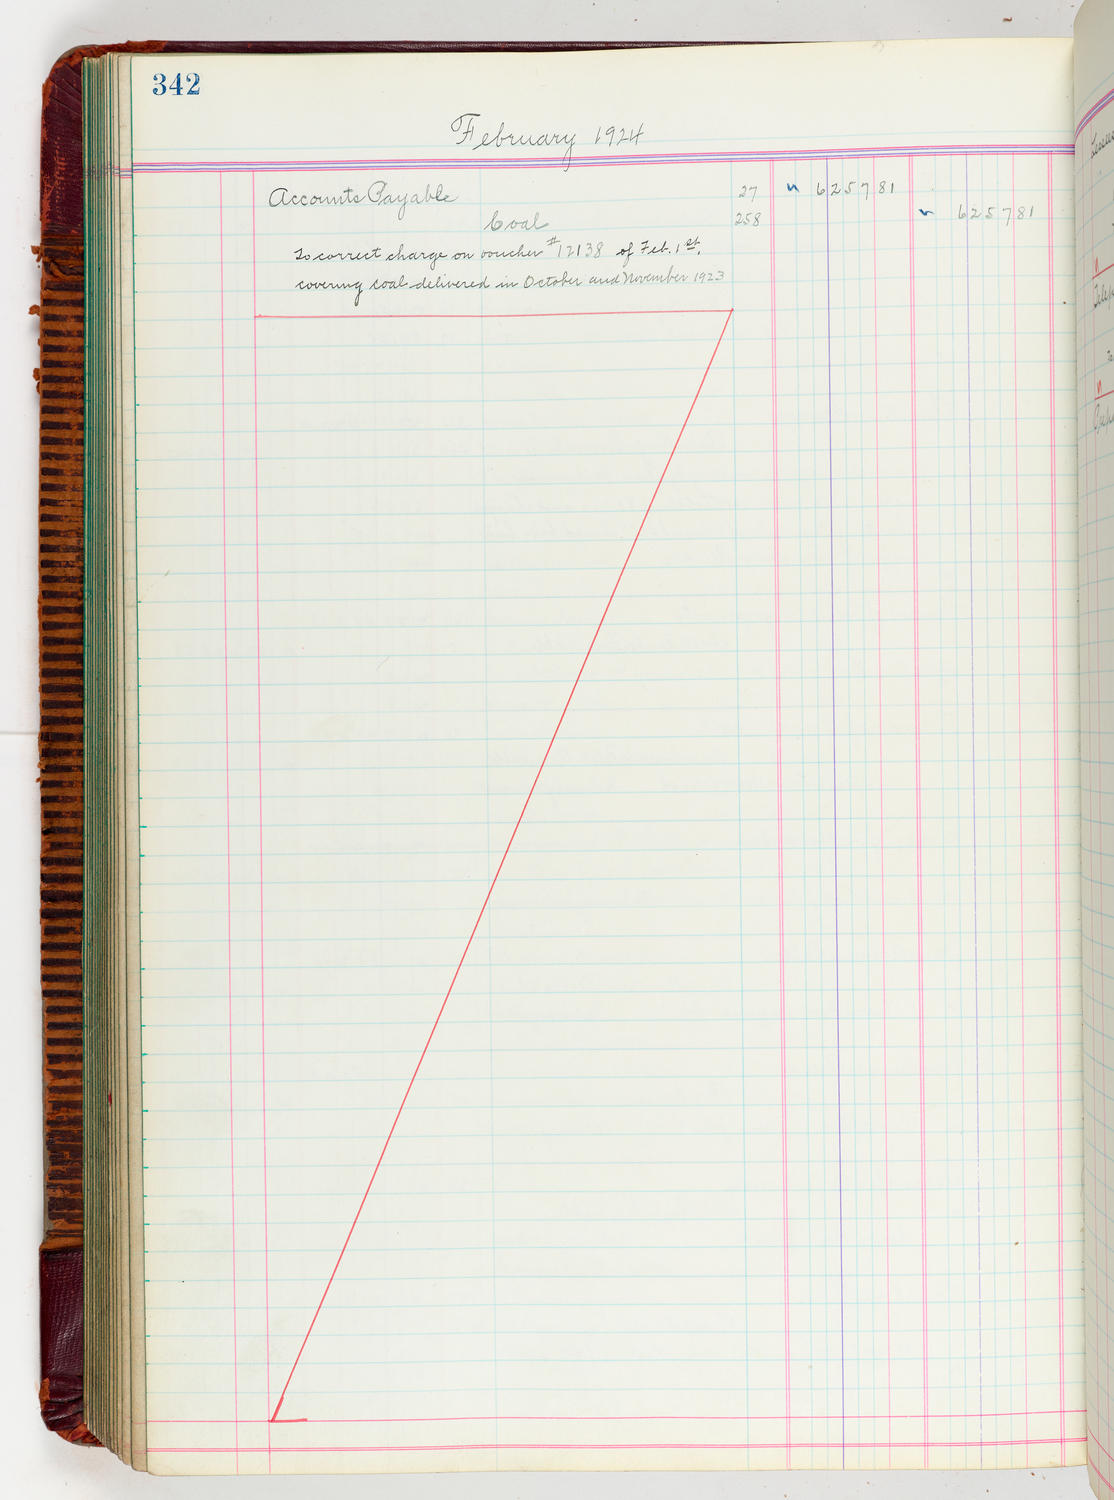 Music Hall Accounting Ledger, volume 5, page 342